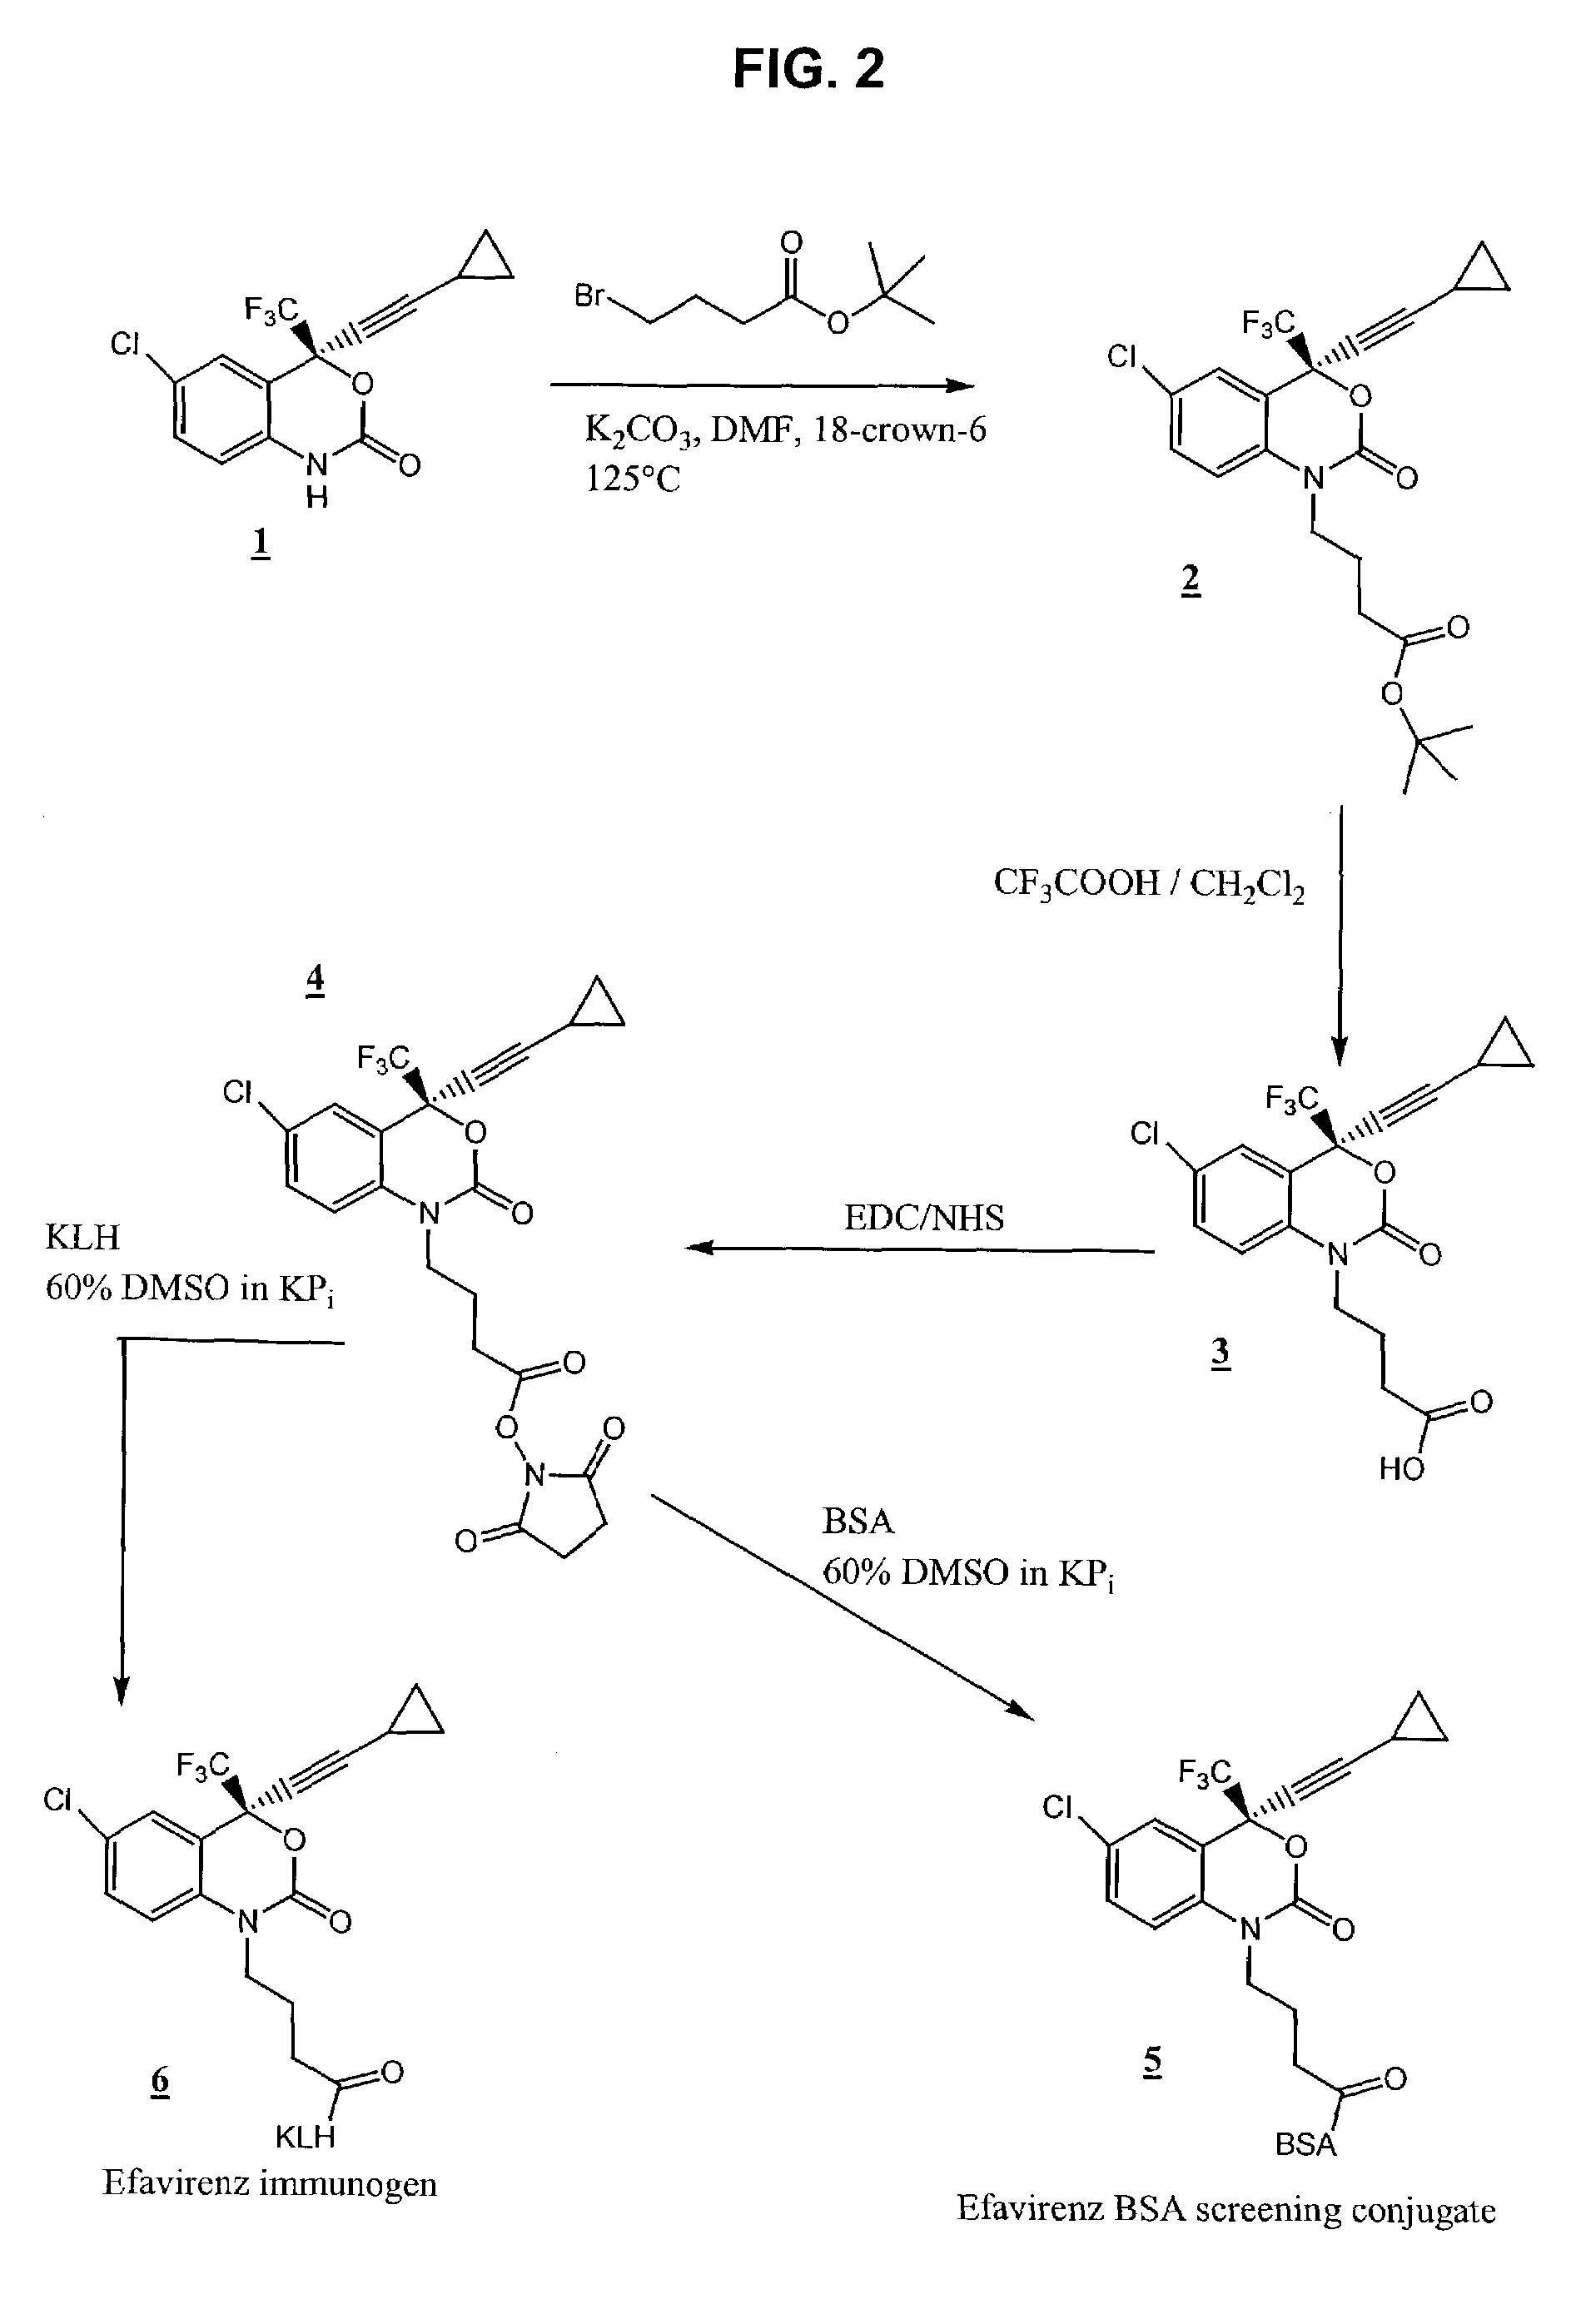 Reagents for detecting efavirenz